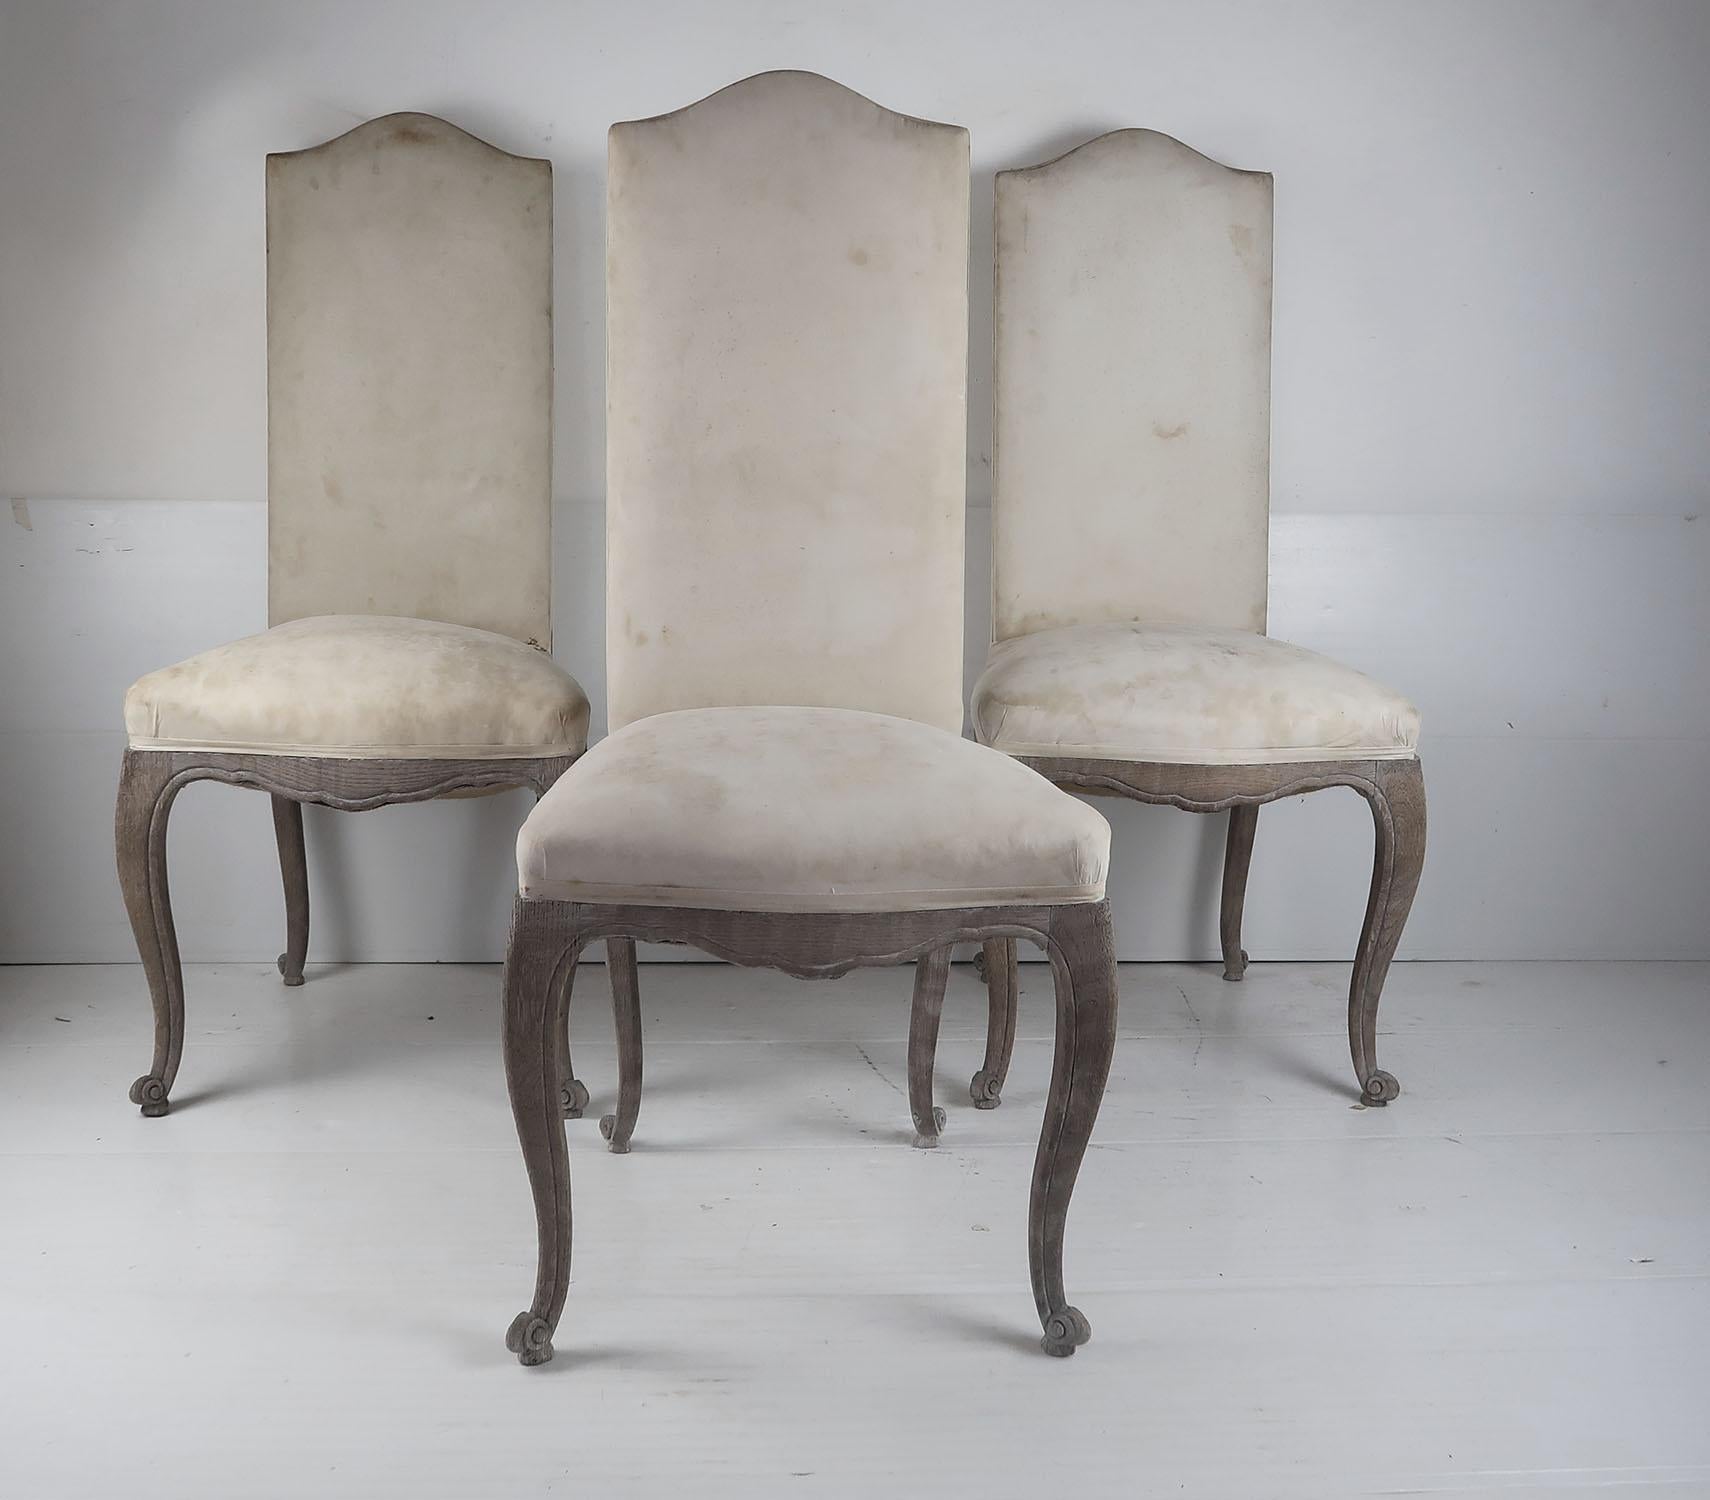 An elegant set of 6 dining chairs.

There is a lovely sort of greyness to the wood

Limed oak with original calico upholstery.

I particularly like the cabriole legs at the back and the simple os de mouton shape to the top rail.

I have not